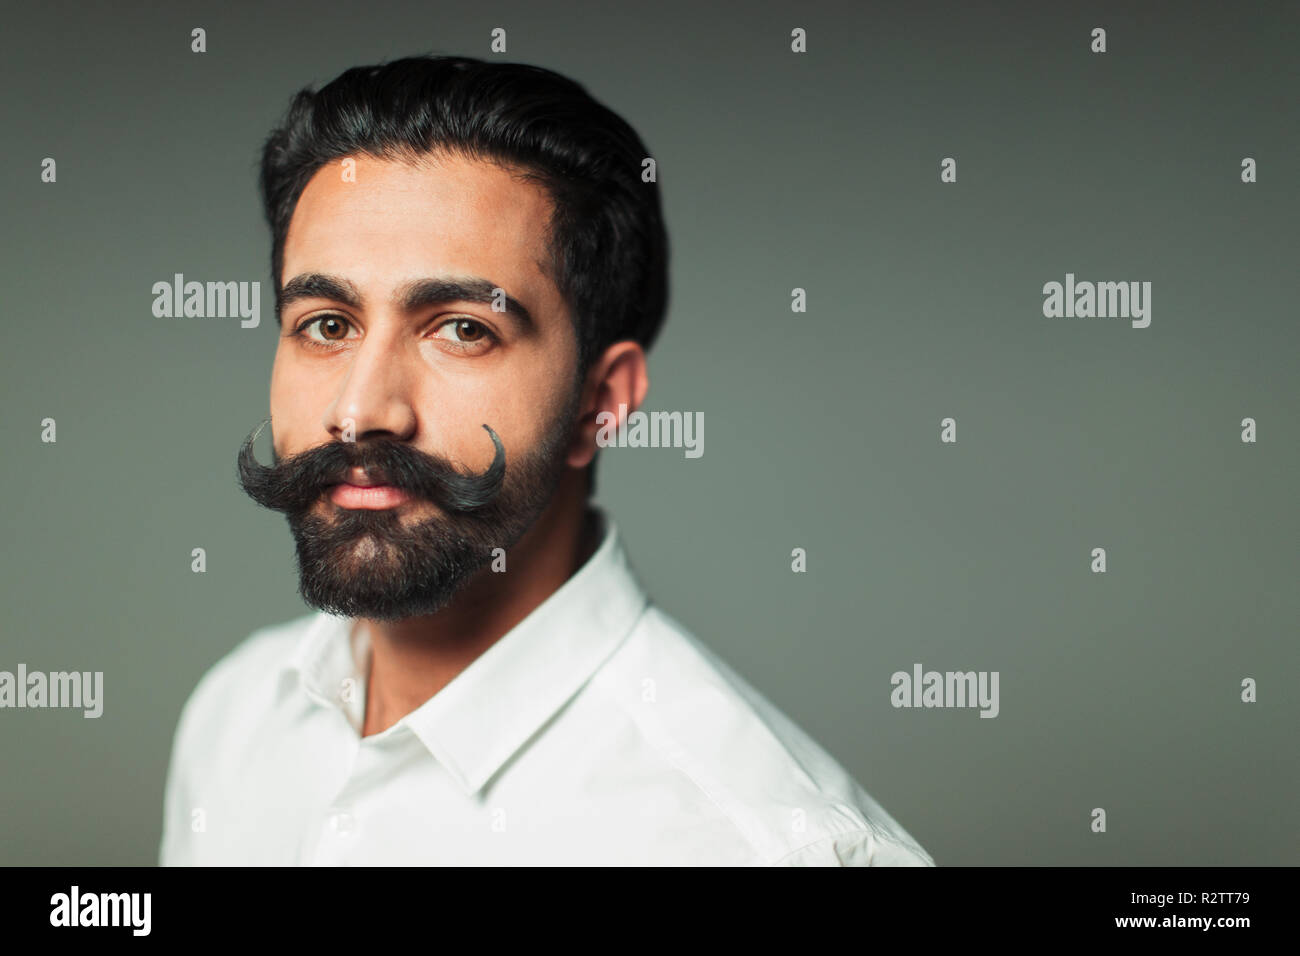 Portrait confident young man with handlebar mustache Stock Photo